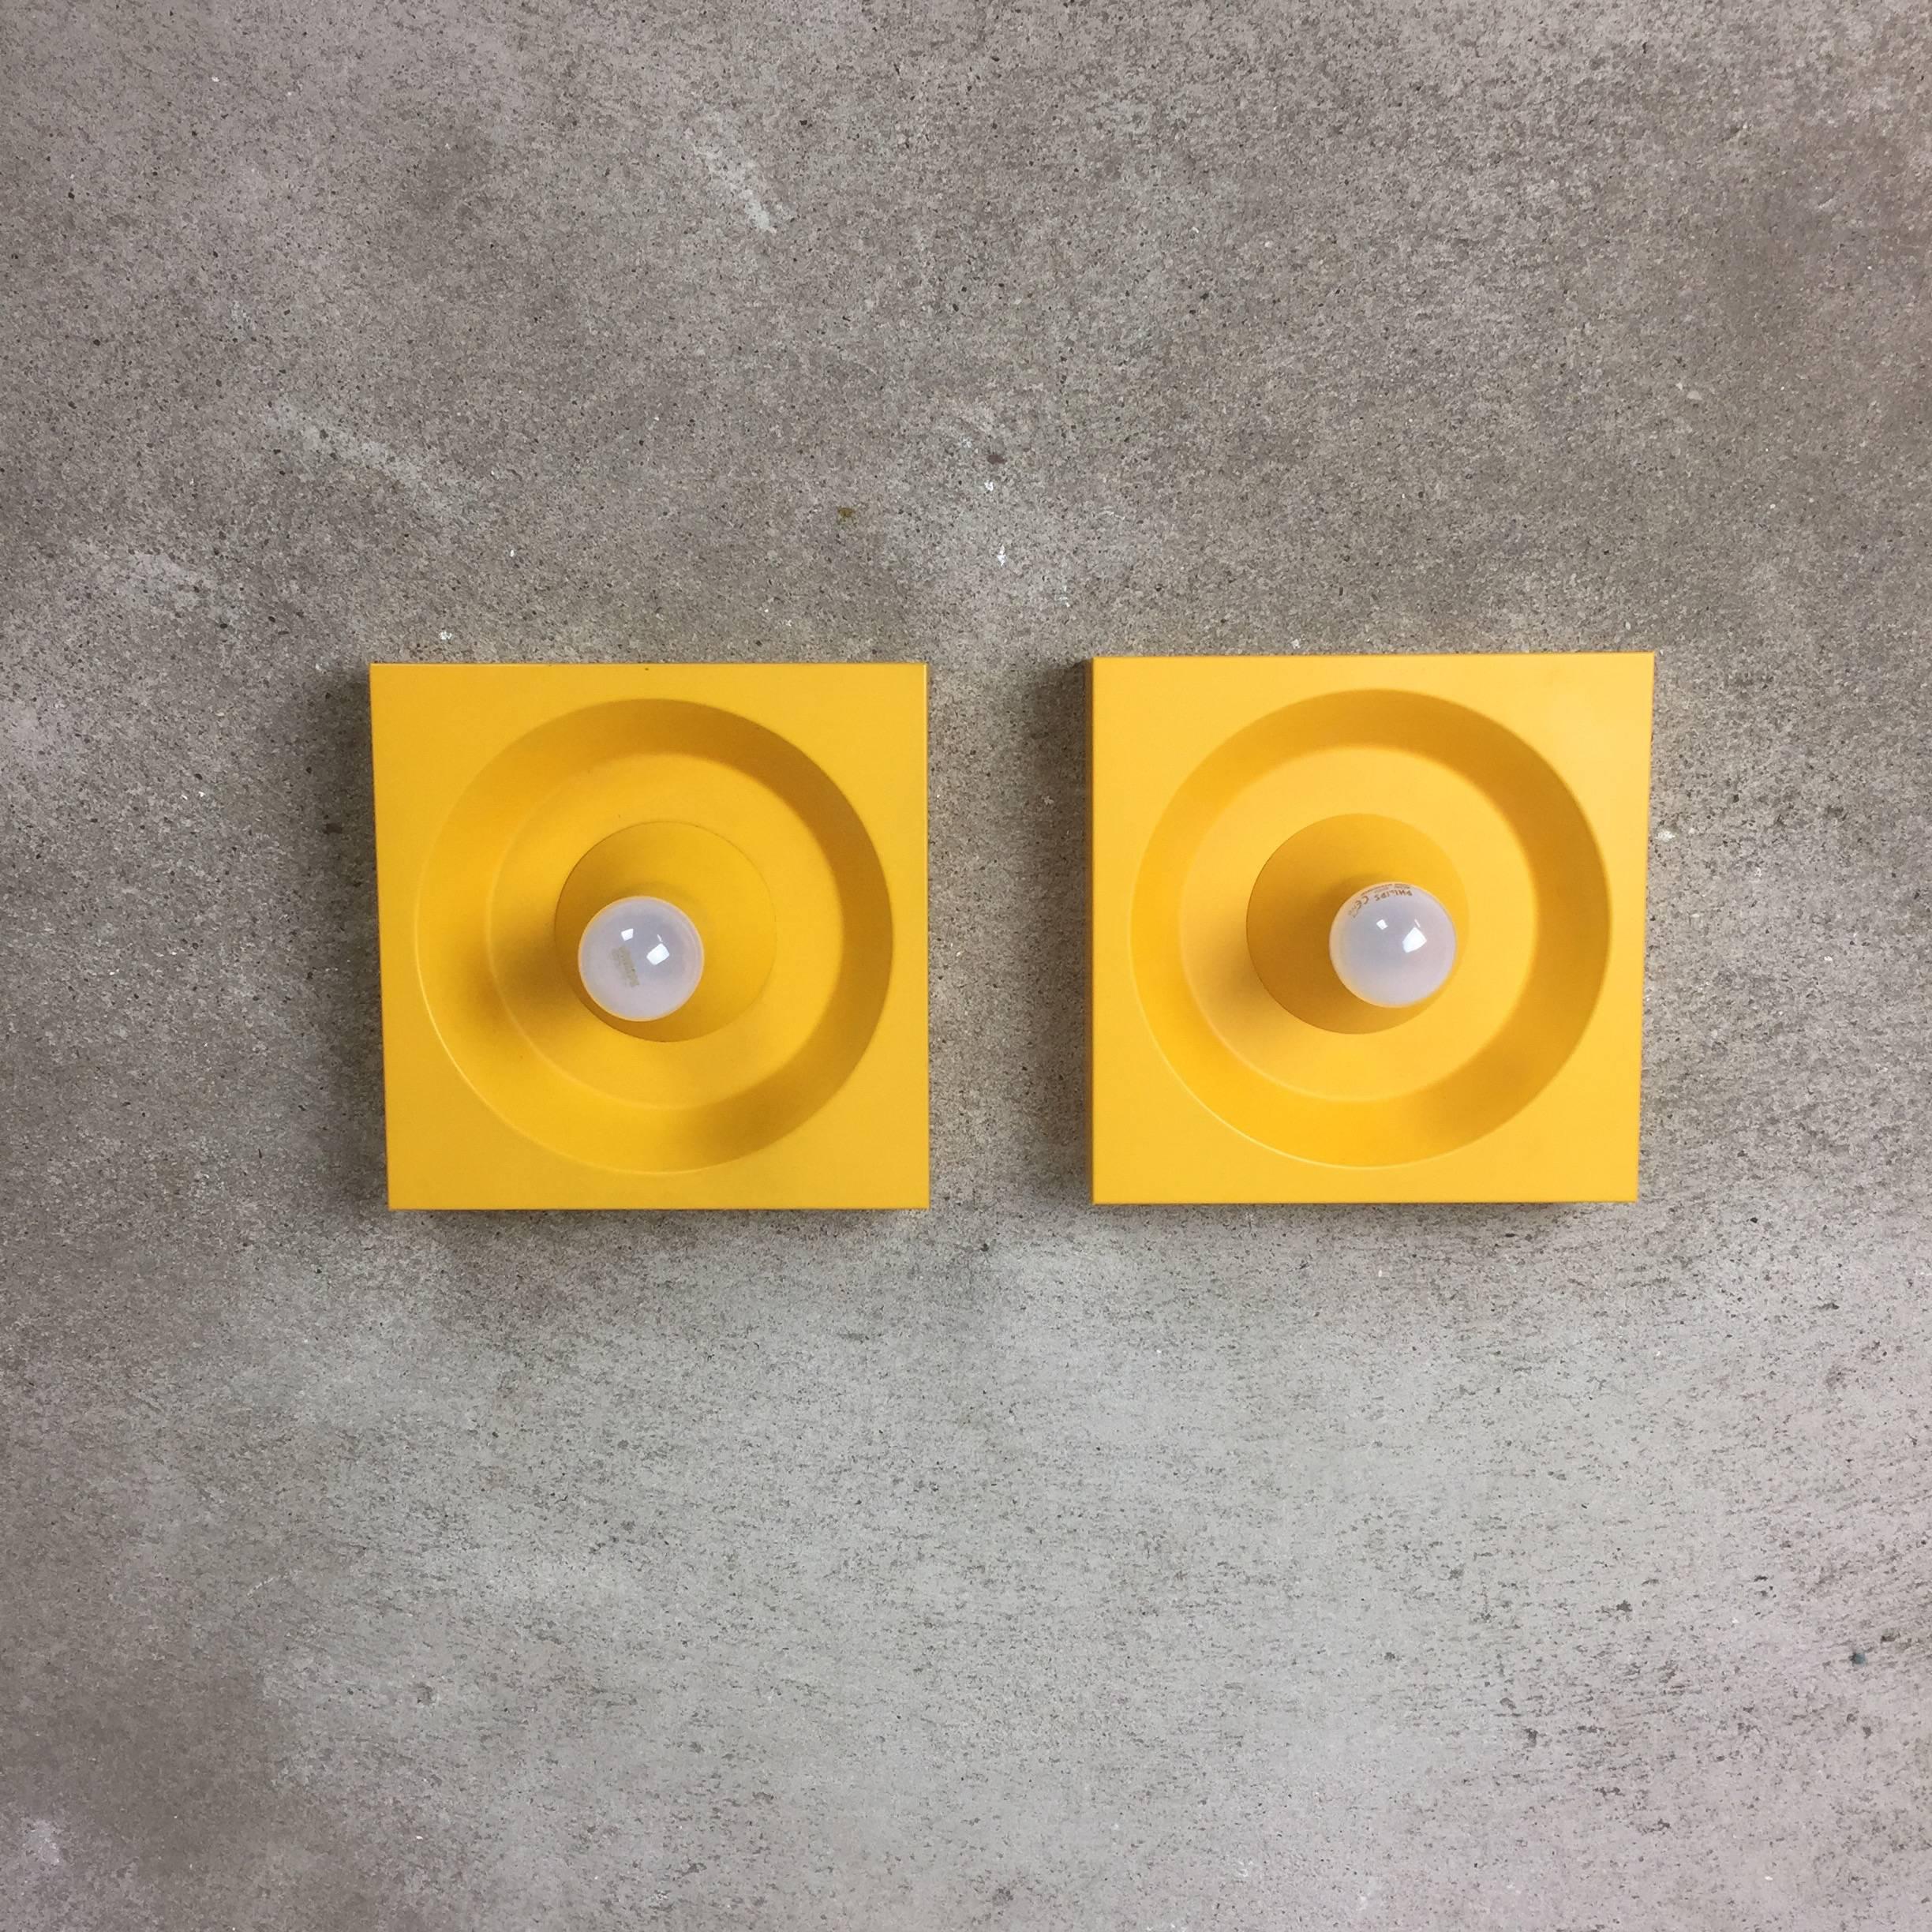 Article:

wall light set of two

Producer:

Kaiser Leuchten

Design:

Klaus Hempel

Origin:

Germany

Age:

1970s

An original yellow wall light designed by Klaus Hempel in the 1970s and produced by Kaiser Leuchten in Germany in the same decade.